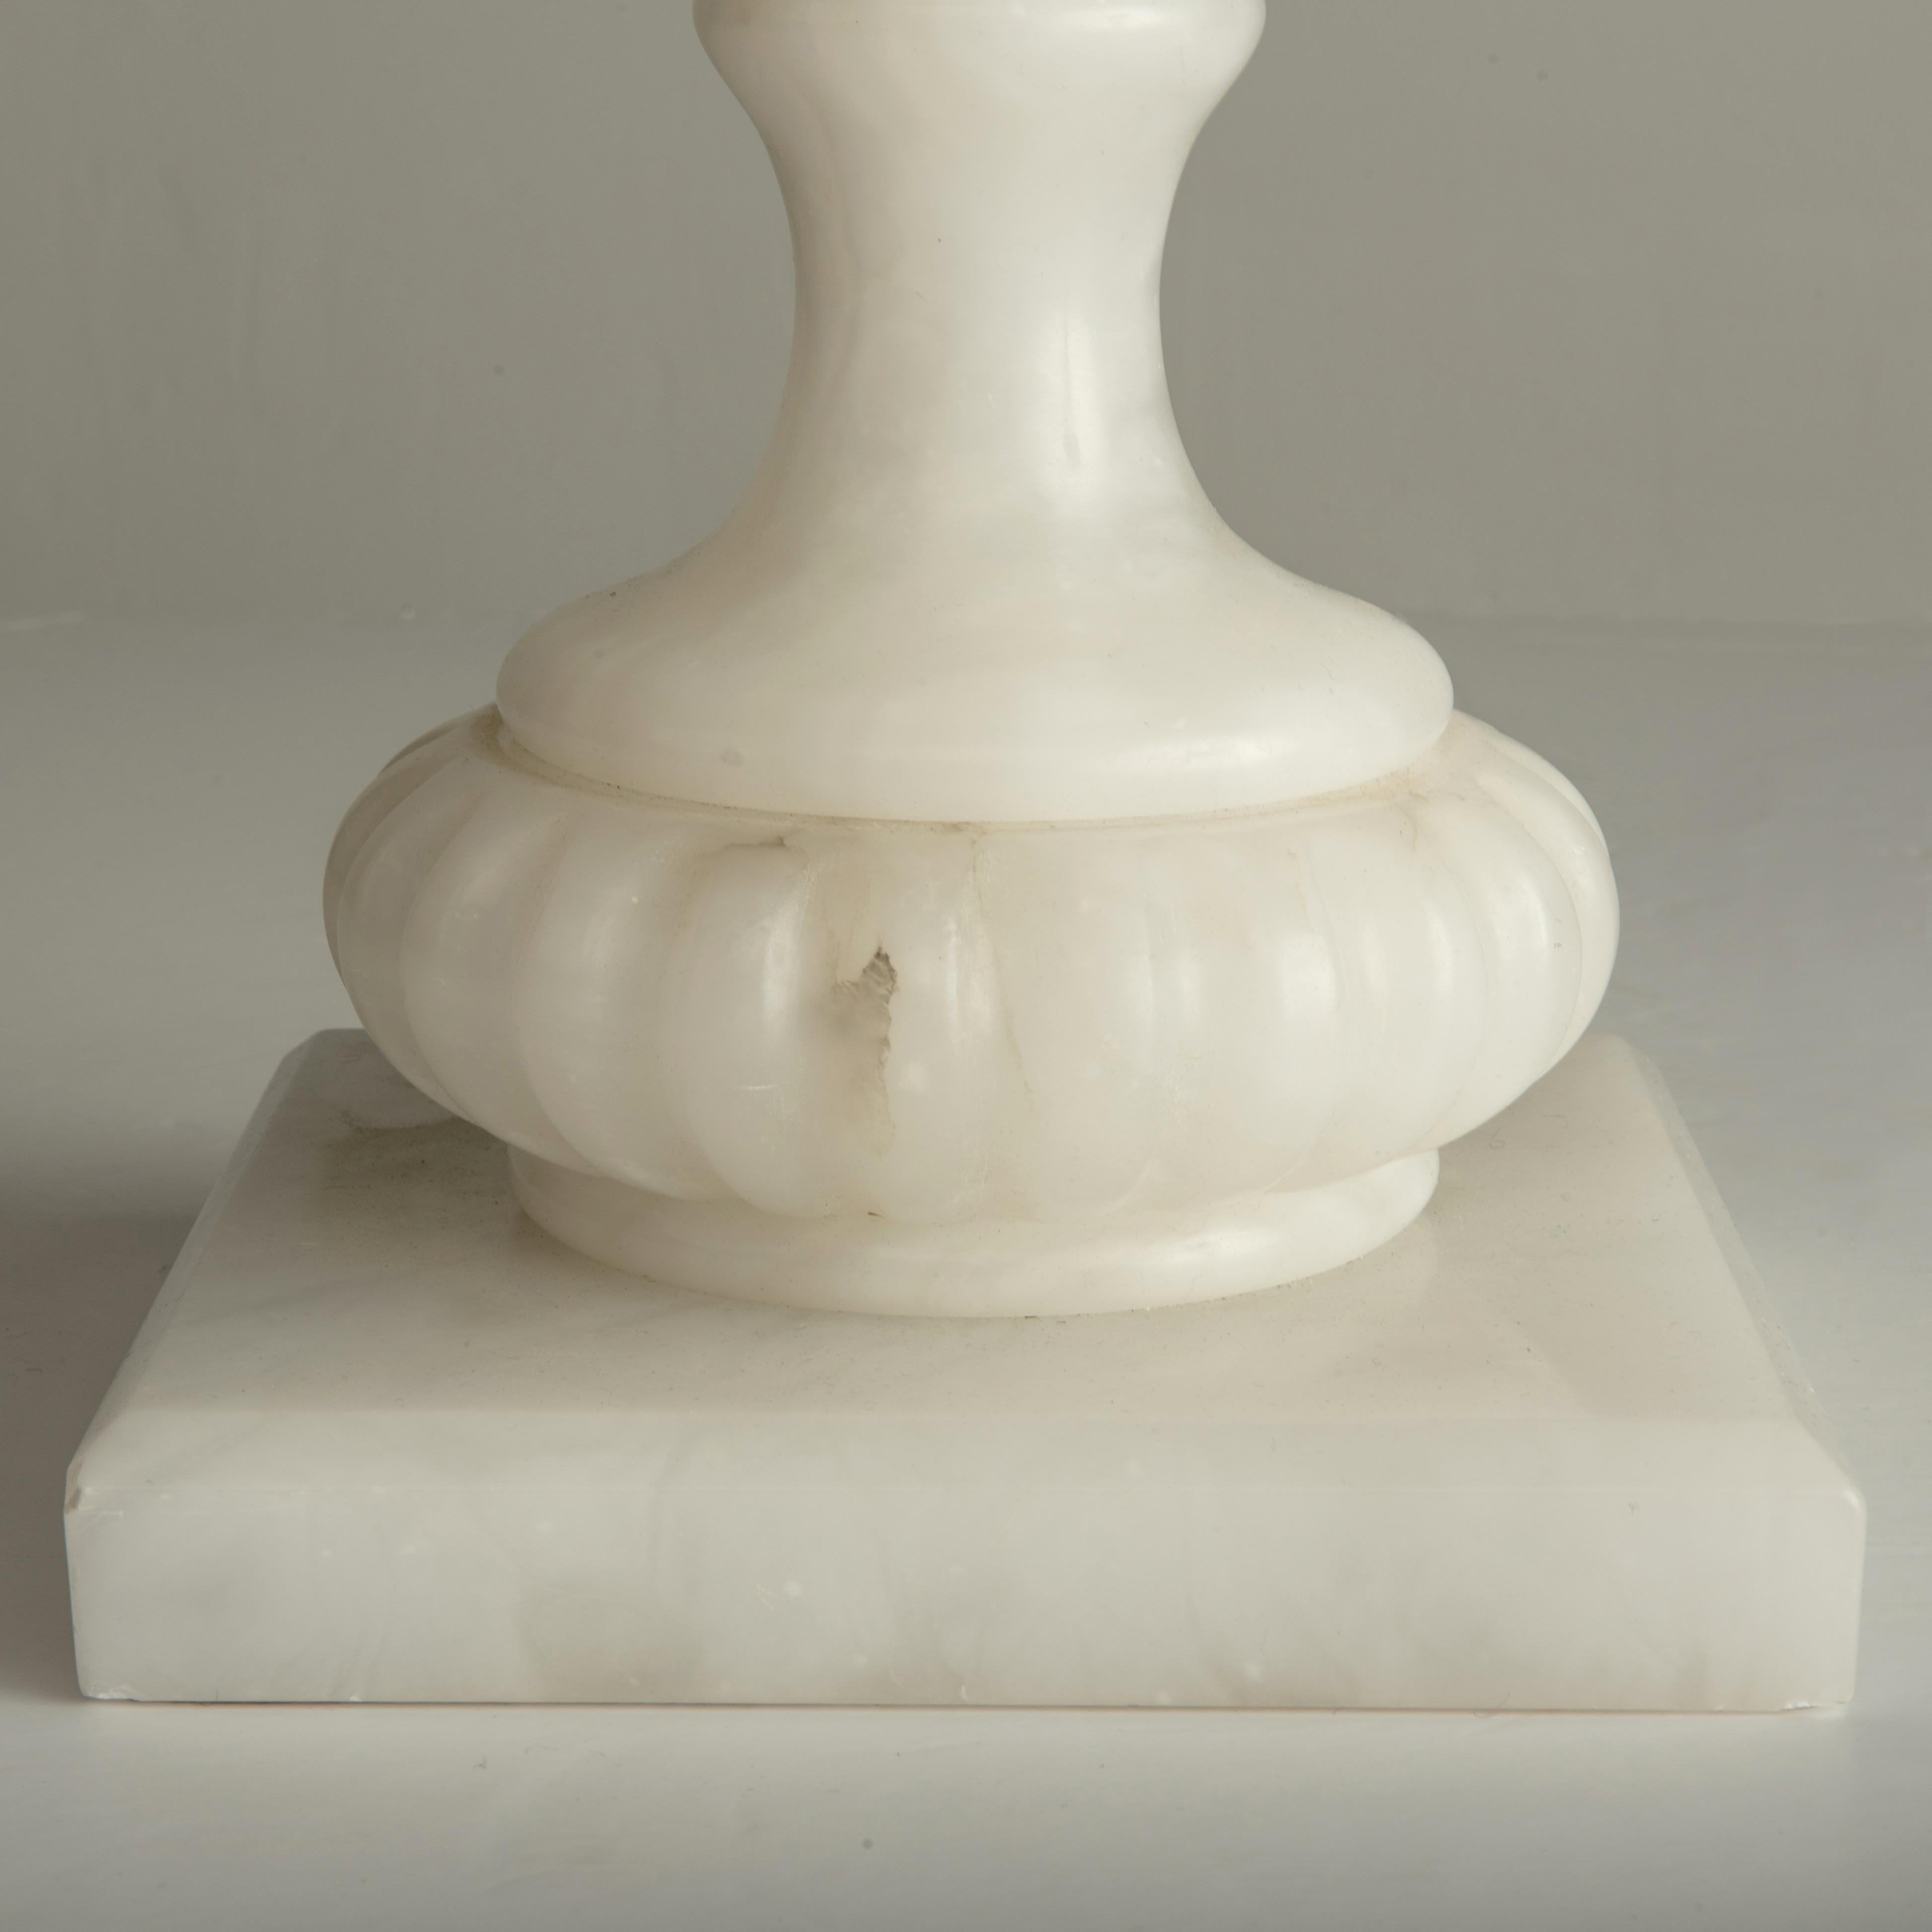 1950s Italian Neoclassical Alabaster Vase Urn Baluster Marbro Style Lamp For Sale 7